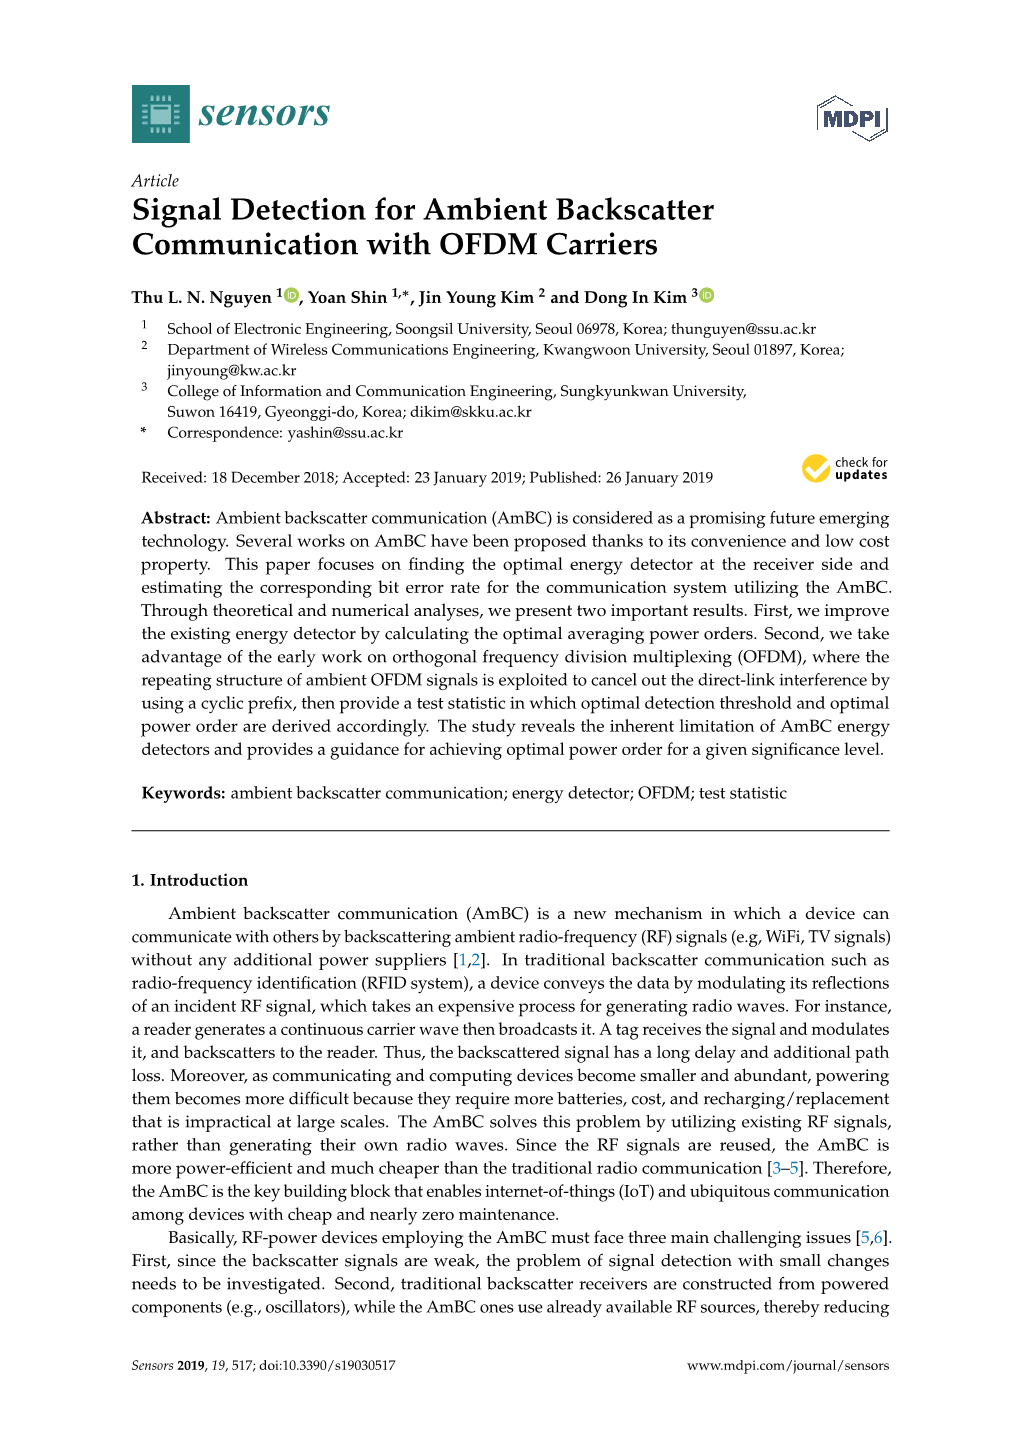 Signal Detection for Ambient Backscatter Communication with OFDM Carriers